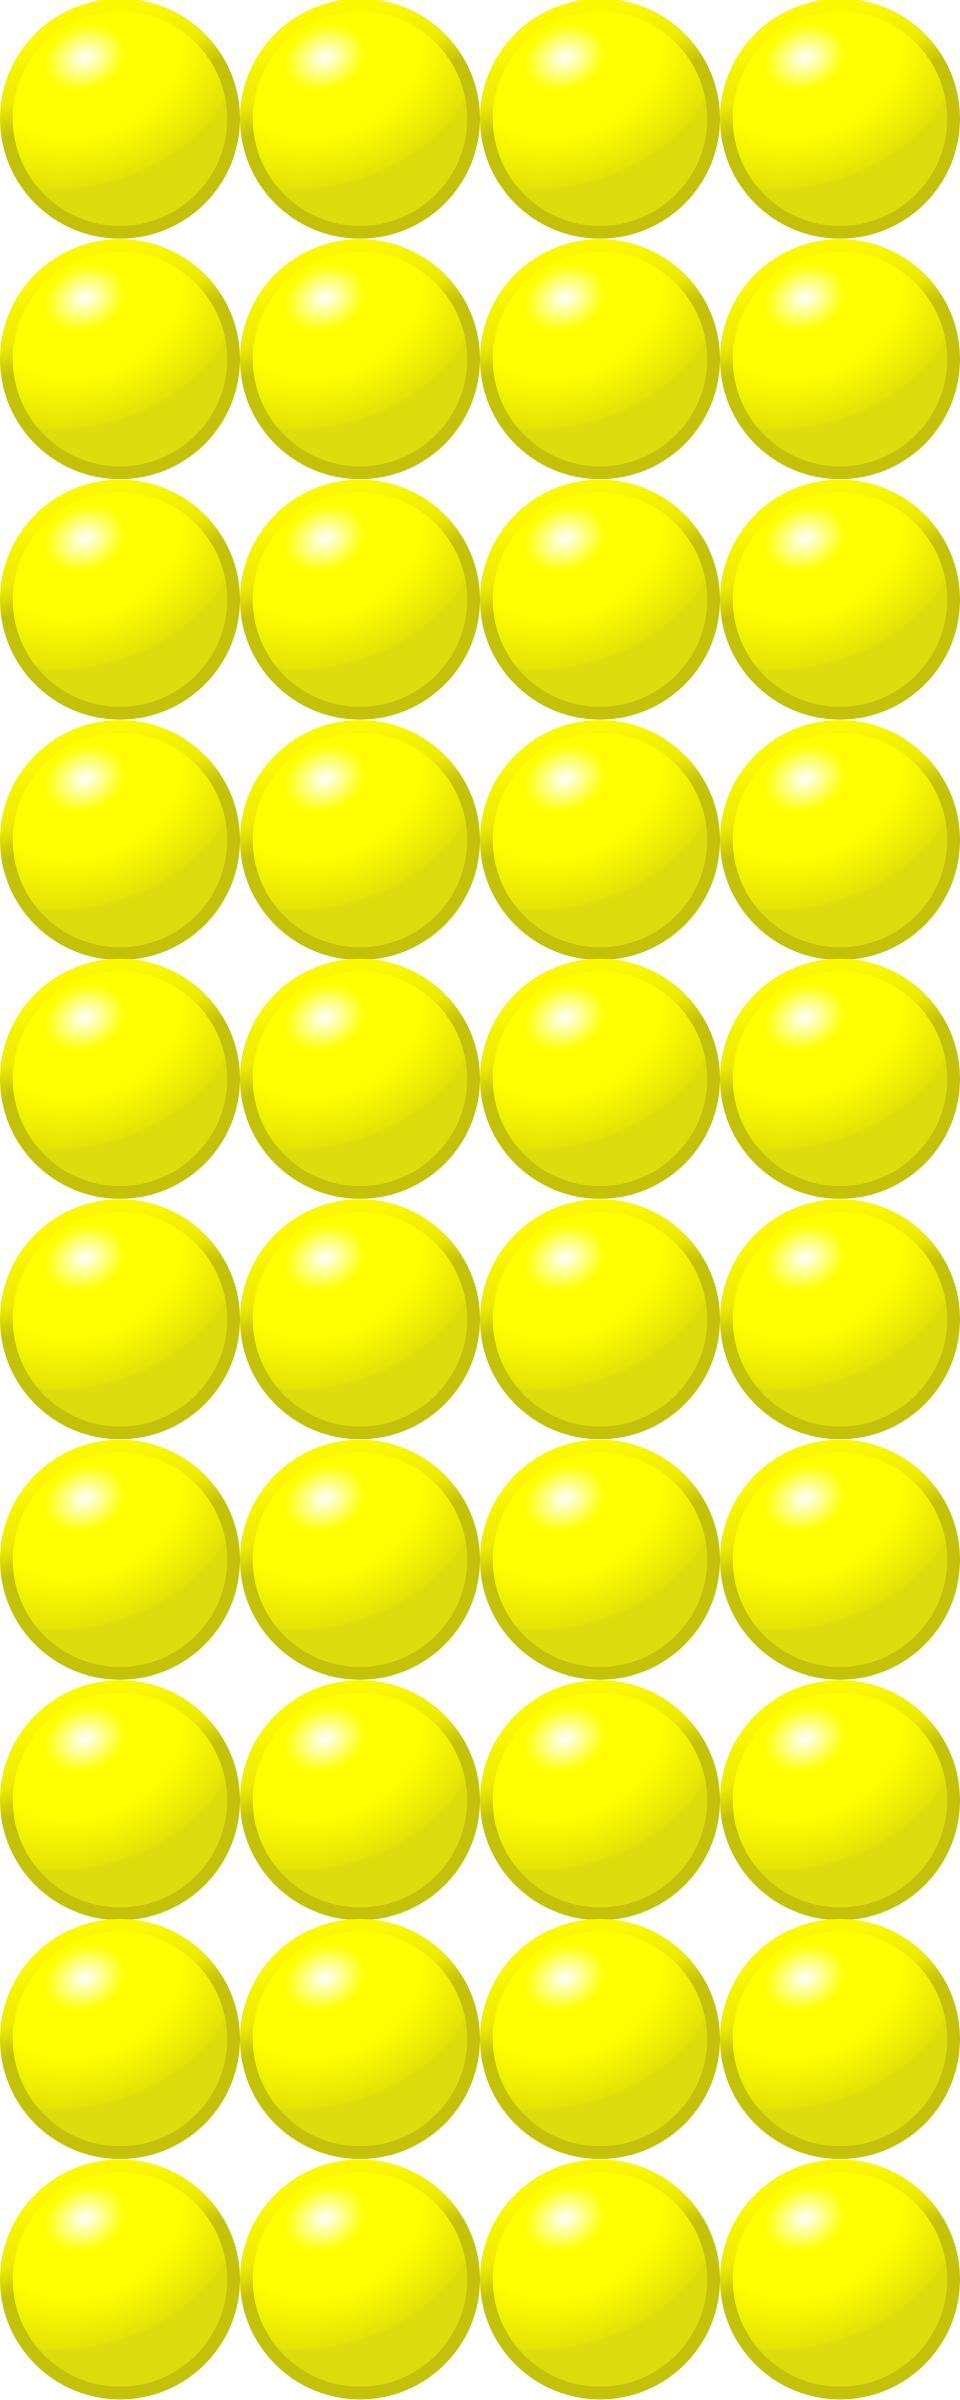 Beads quantitative picture for multiplication 10x4 png